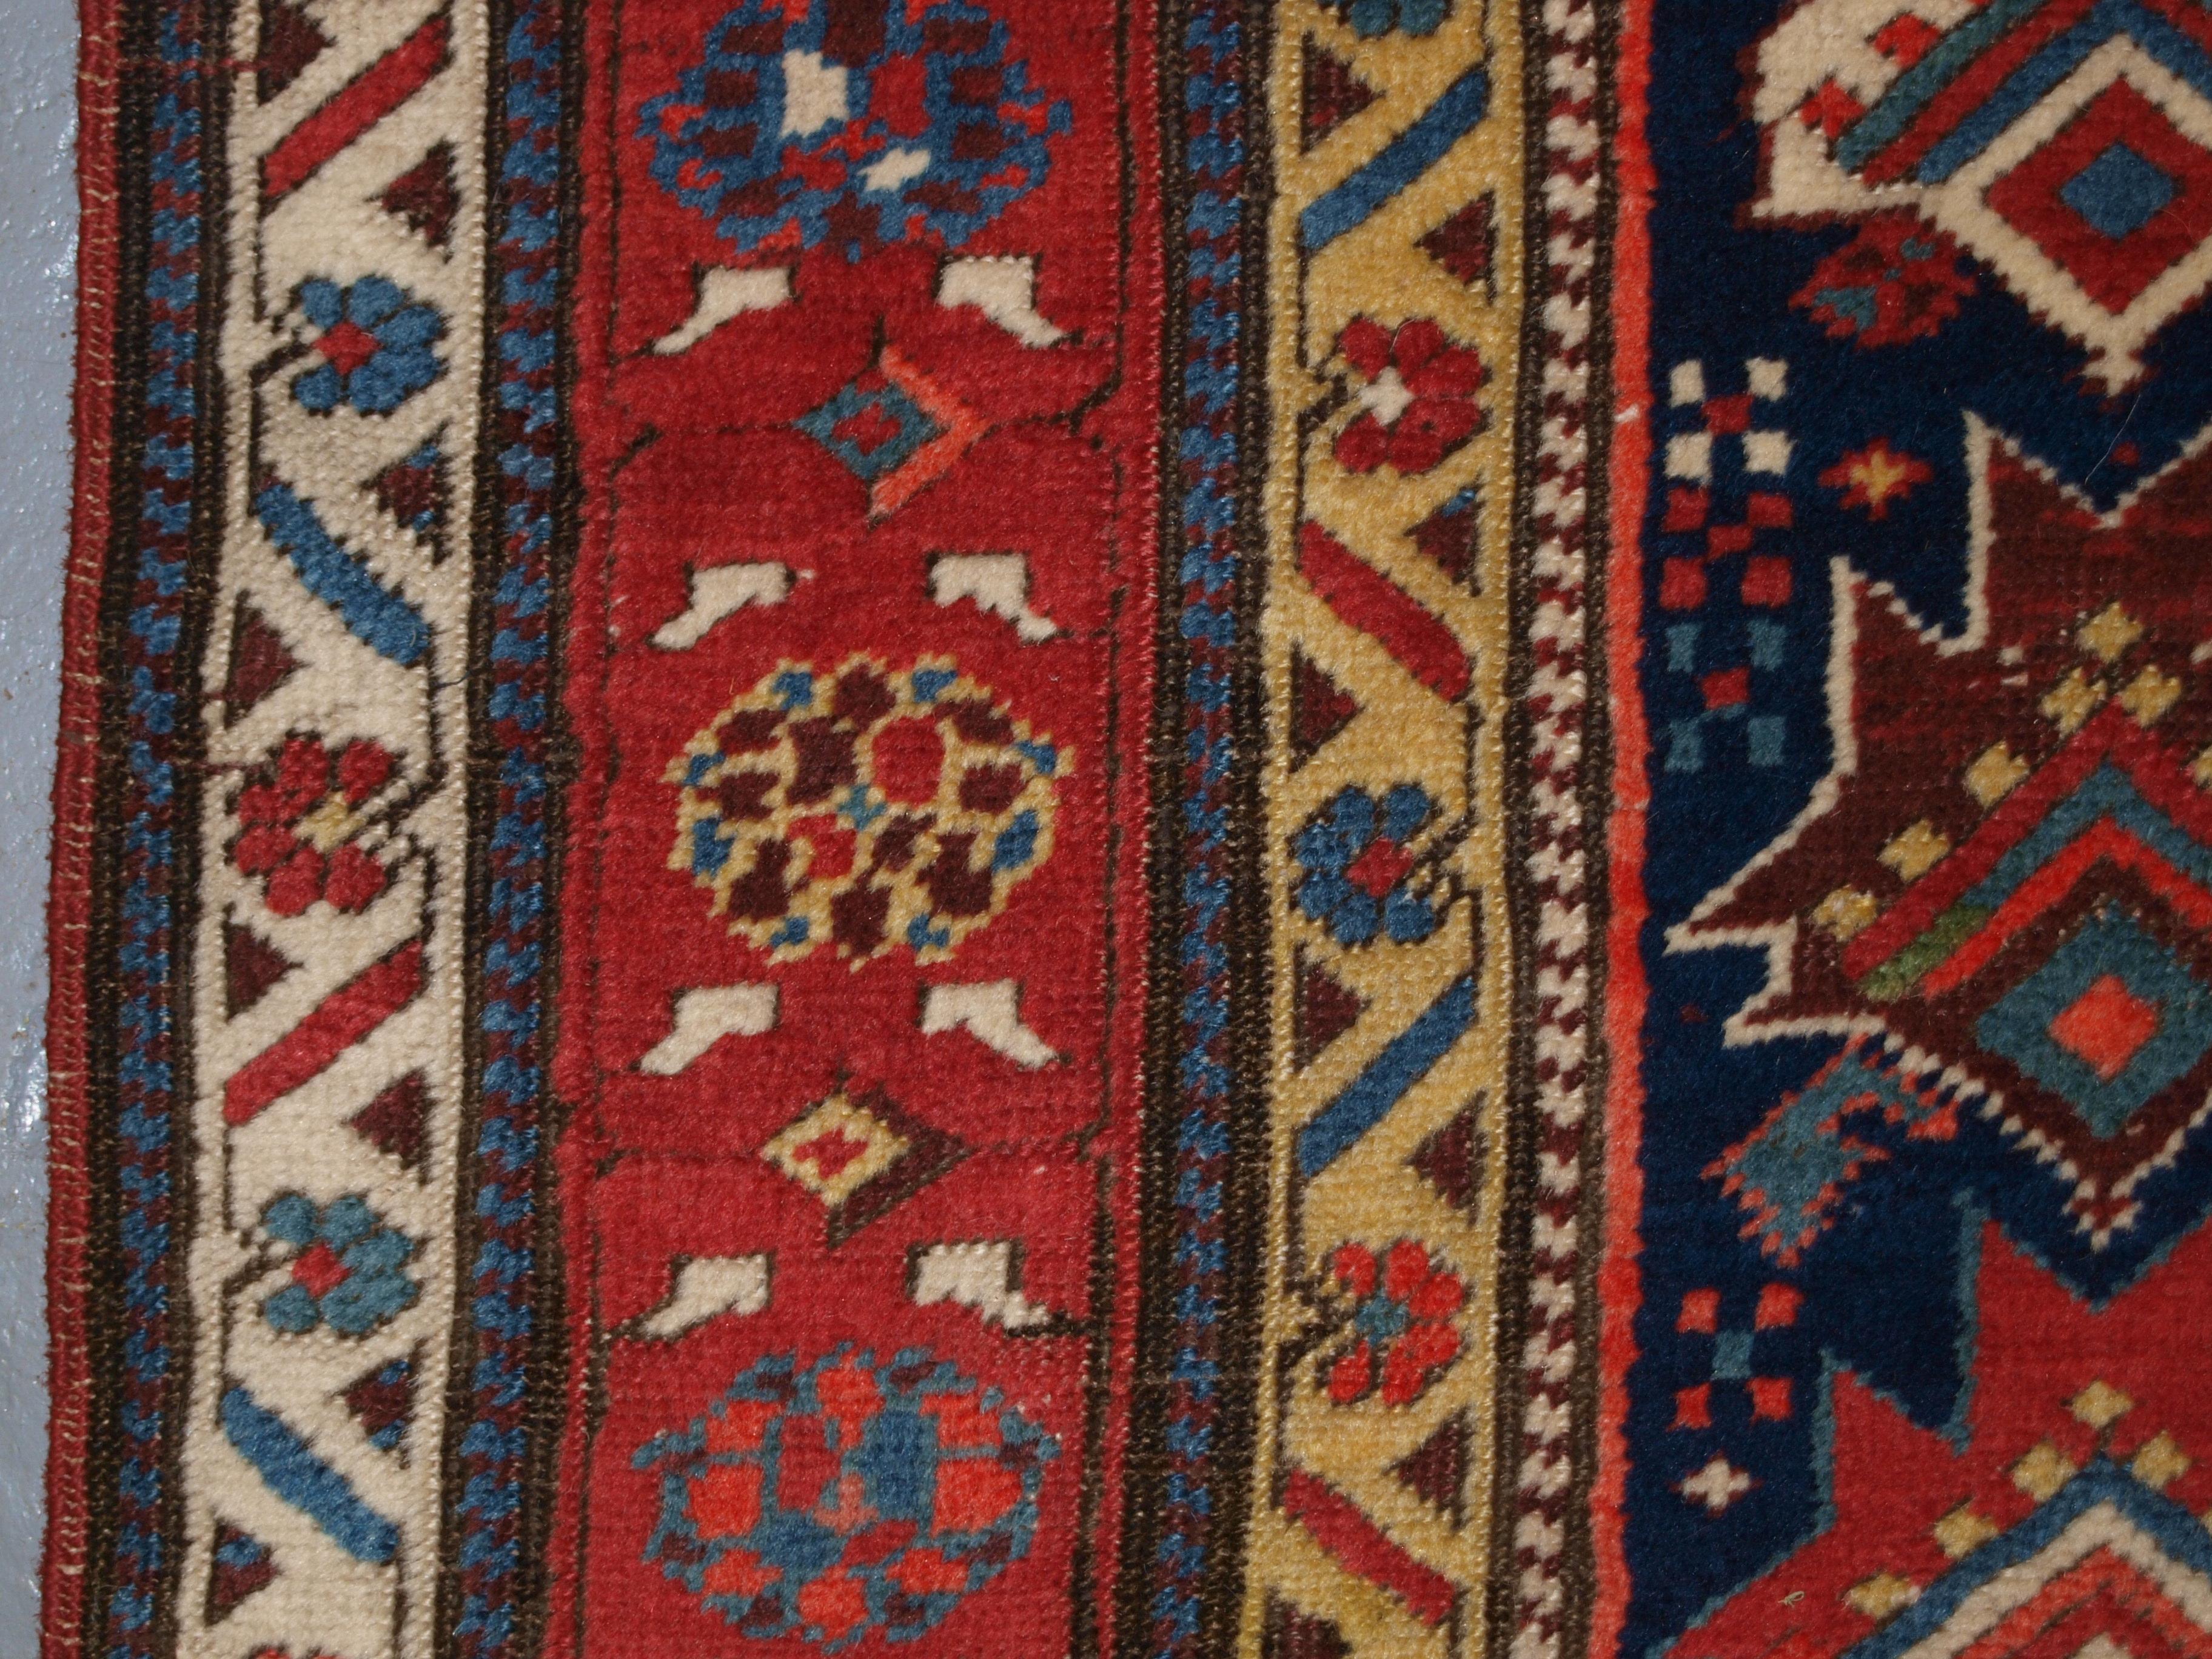 Floral red and yellow border design of antique south caucasian runner